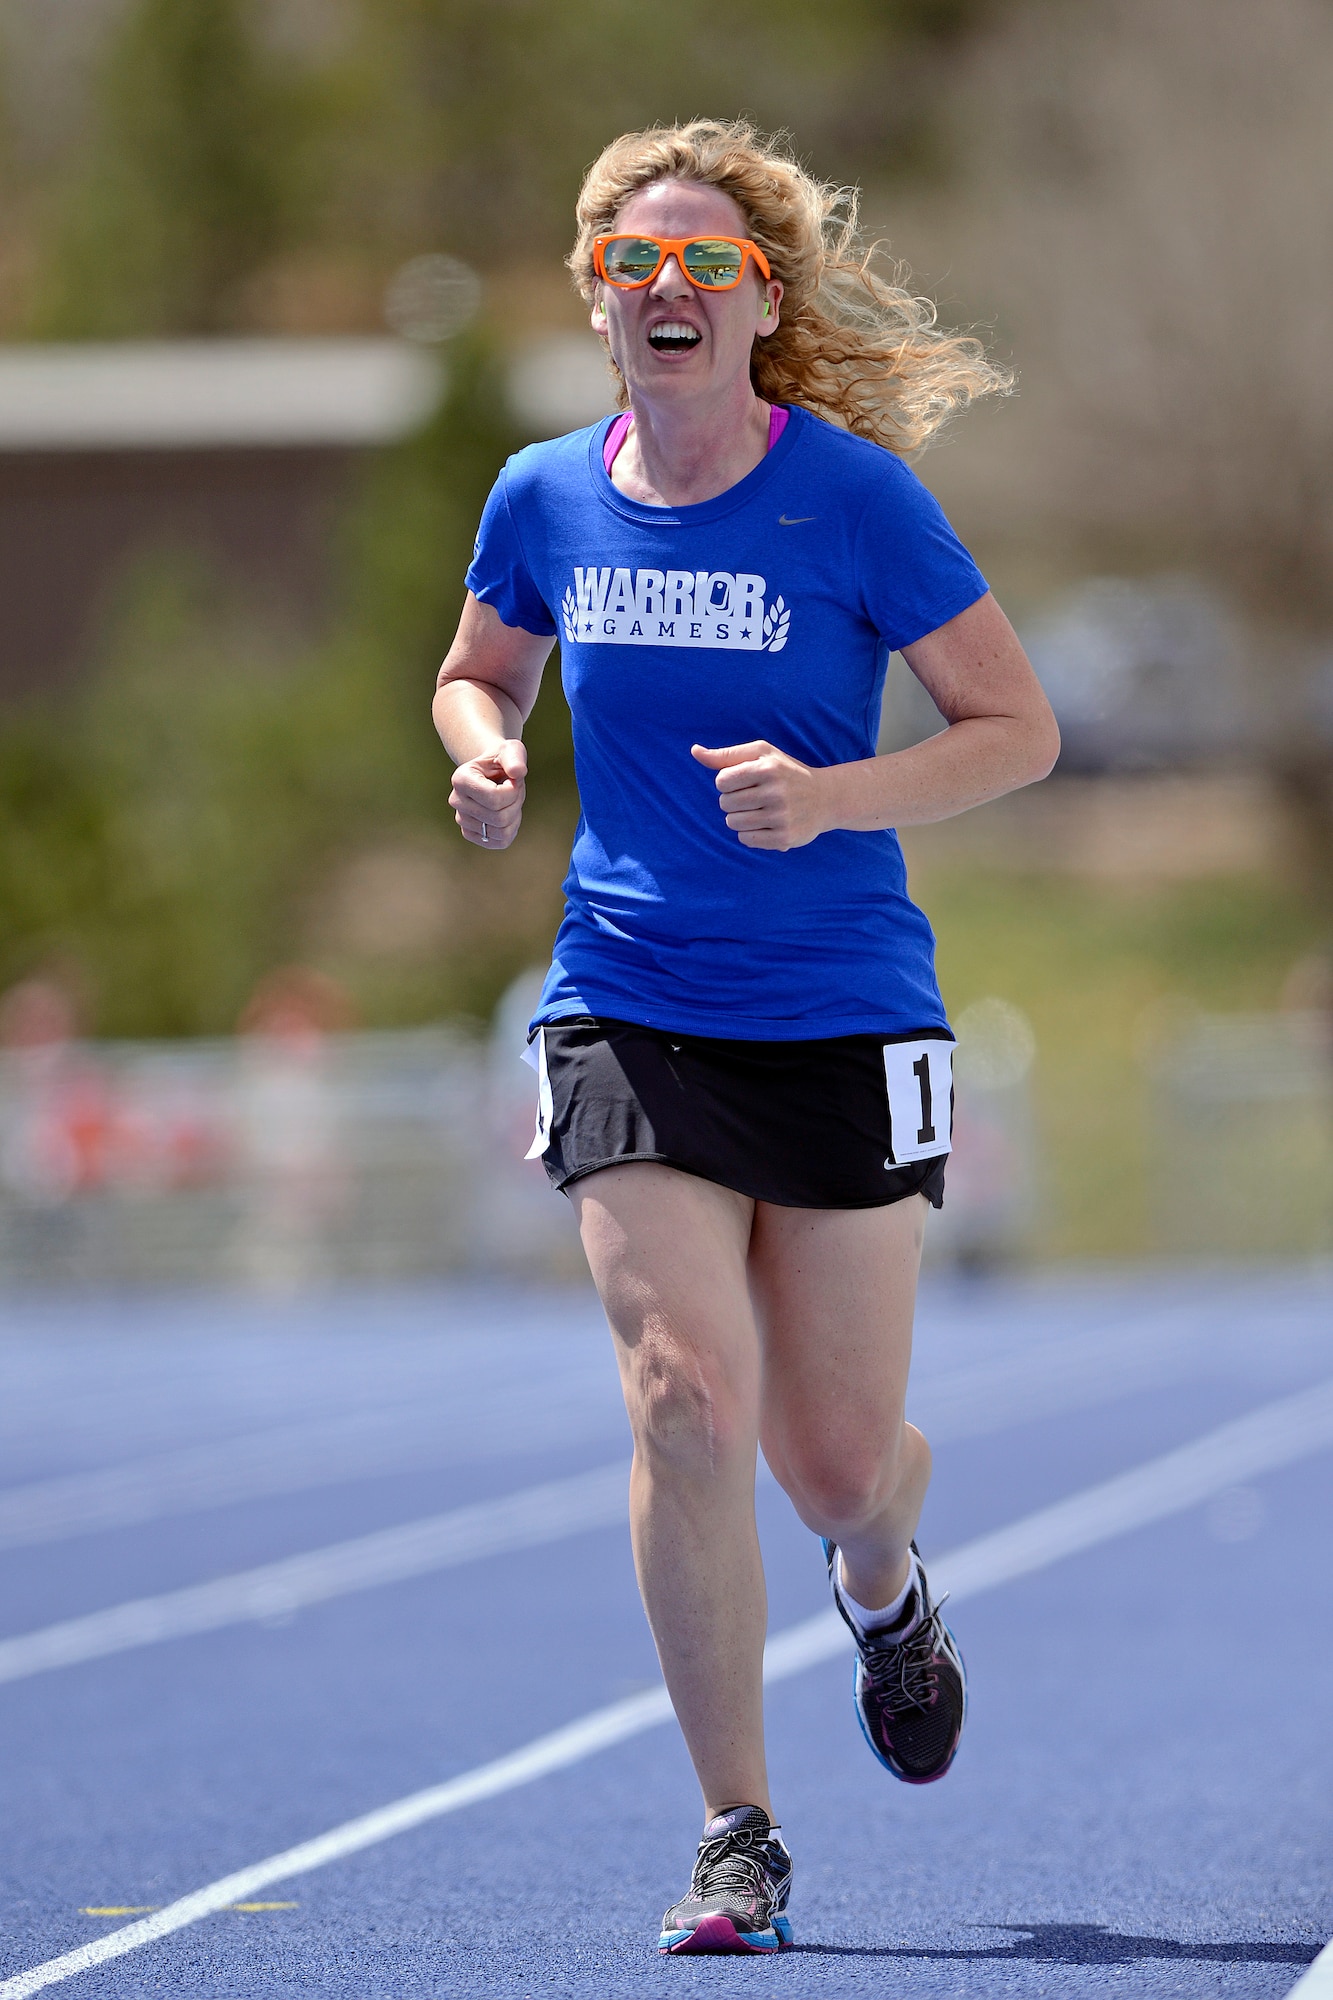 Retired Tech. Sgt. Kathryn Robinson of Detroit, Mich., competes in the track and field competition May 14, 2013 at the Air Force Academy track during the Warrior Games. Robinson is competing in both the track and field and swimming events this year. (U.S. Air Force photo/Mike Kaplan)